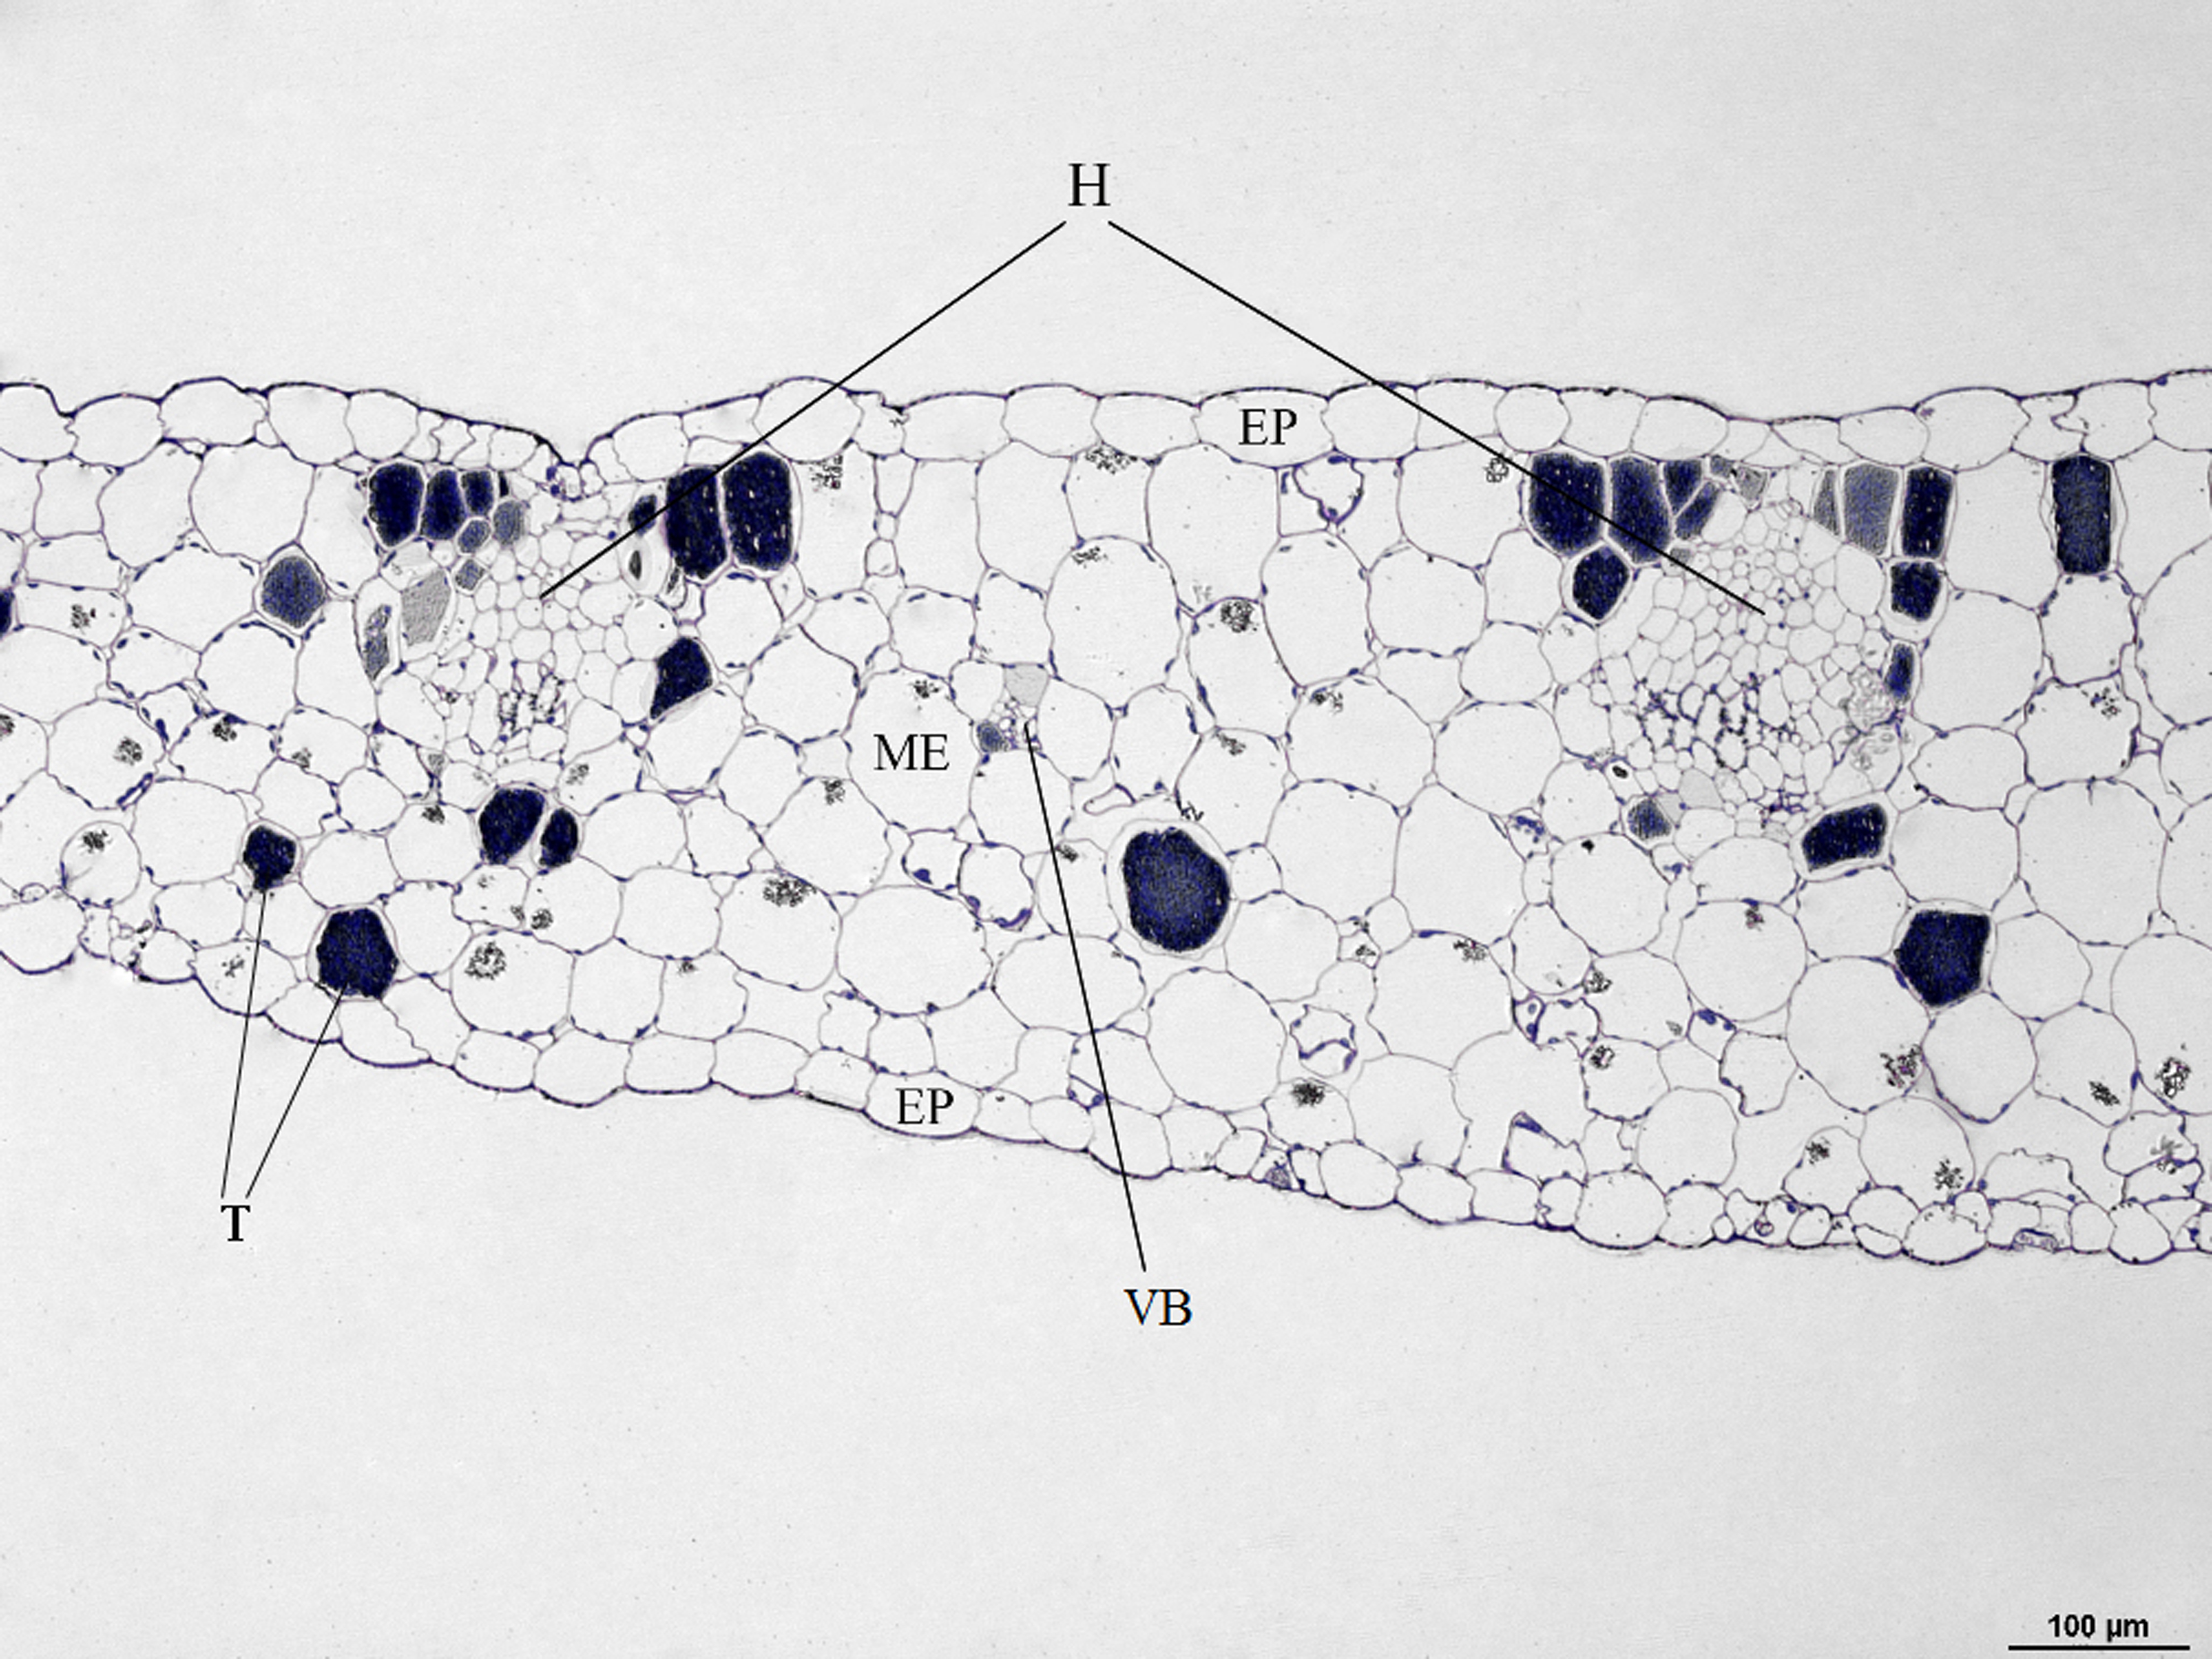 Fig. 2. Light micrograph of a cross section of the leaf Crassula cordata: H – hydathodes; EP – epidermis; ME – mesophyll; T – tannin cells.